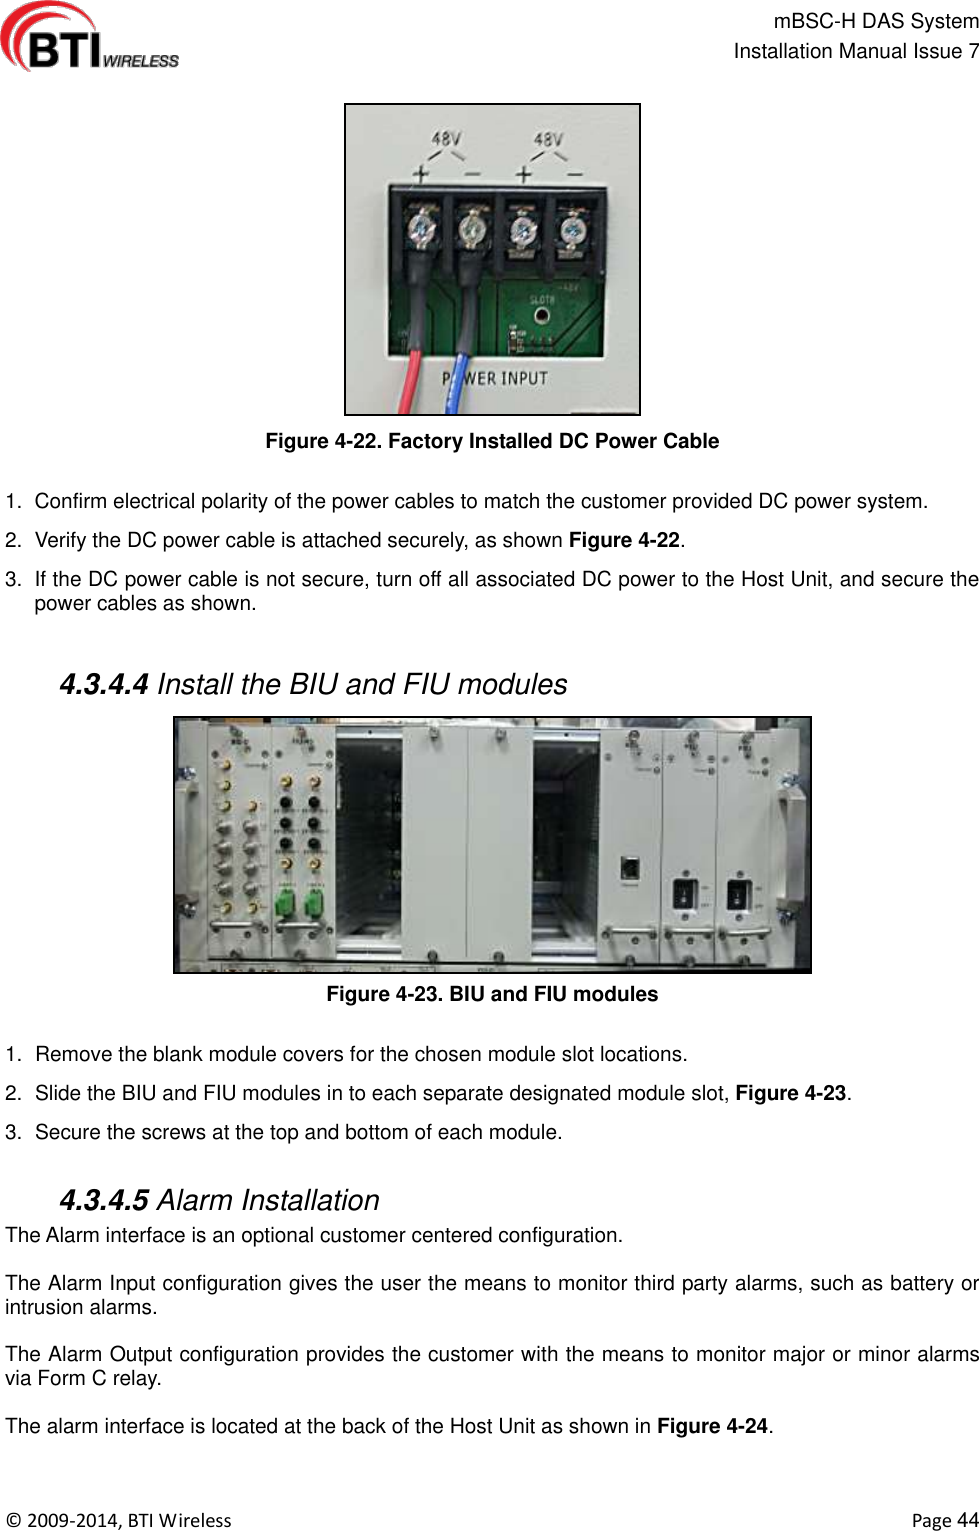                                                   mBSC-H DAS System   Installation Manual Issue 7  ©  2009-2014, BTI Wireless    Page 44  Figure 4-22. Factory Installed DC Power Cable  1.  Confirm electrical polarity of the power cables to match the customer provided DC power system. 2.  Verify the DC power cable is attached securely, as shown Figure 4-22. 3.  If the DC power cable is not secure, turn off all associated DC power to the Host Unit, and secure the power cables as shown.   4.3.4.4 Install the BIU and FIU modules Figure 4-23. BIU and FIU modules  1.  Remove the blank module covers for the chosen module slot locations. 2.  Slide the BIU and FIU modules in to each separate designated module slot, Figure 4-23. 3.  Secure the screws at the top and bottom of each module.   4.3.4.5 Alarm Installation The Alarm interface is an optional customer centered configuration.    The Alarm Input configuration gives the user the means to monitor third party alarms, such as battery or intrusion alarms.  The Alarm Output configuration provides the customer with the means to monitor major or minor alarms via Form C relay.  The alarm interface is located at the back of the Host Unit as shown in Figure 4-24. 